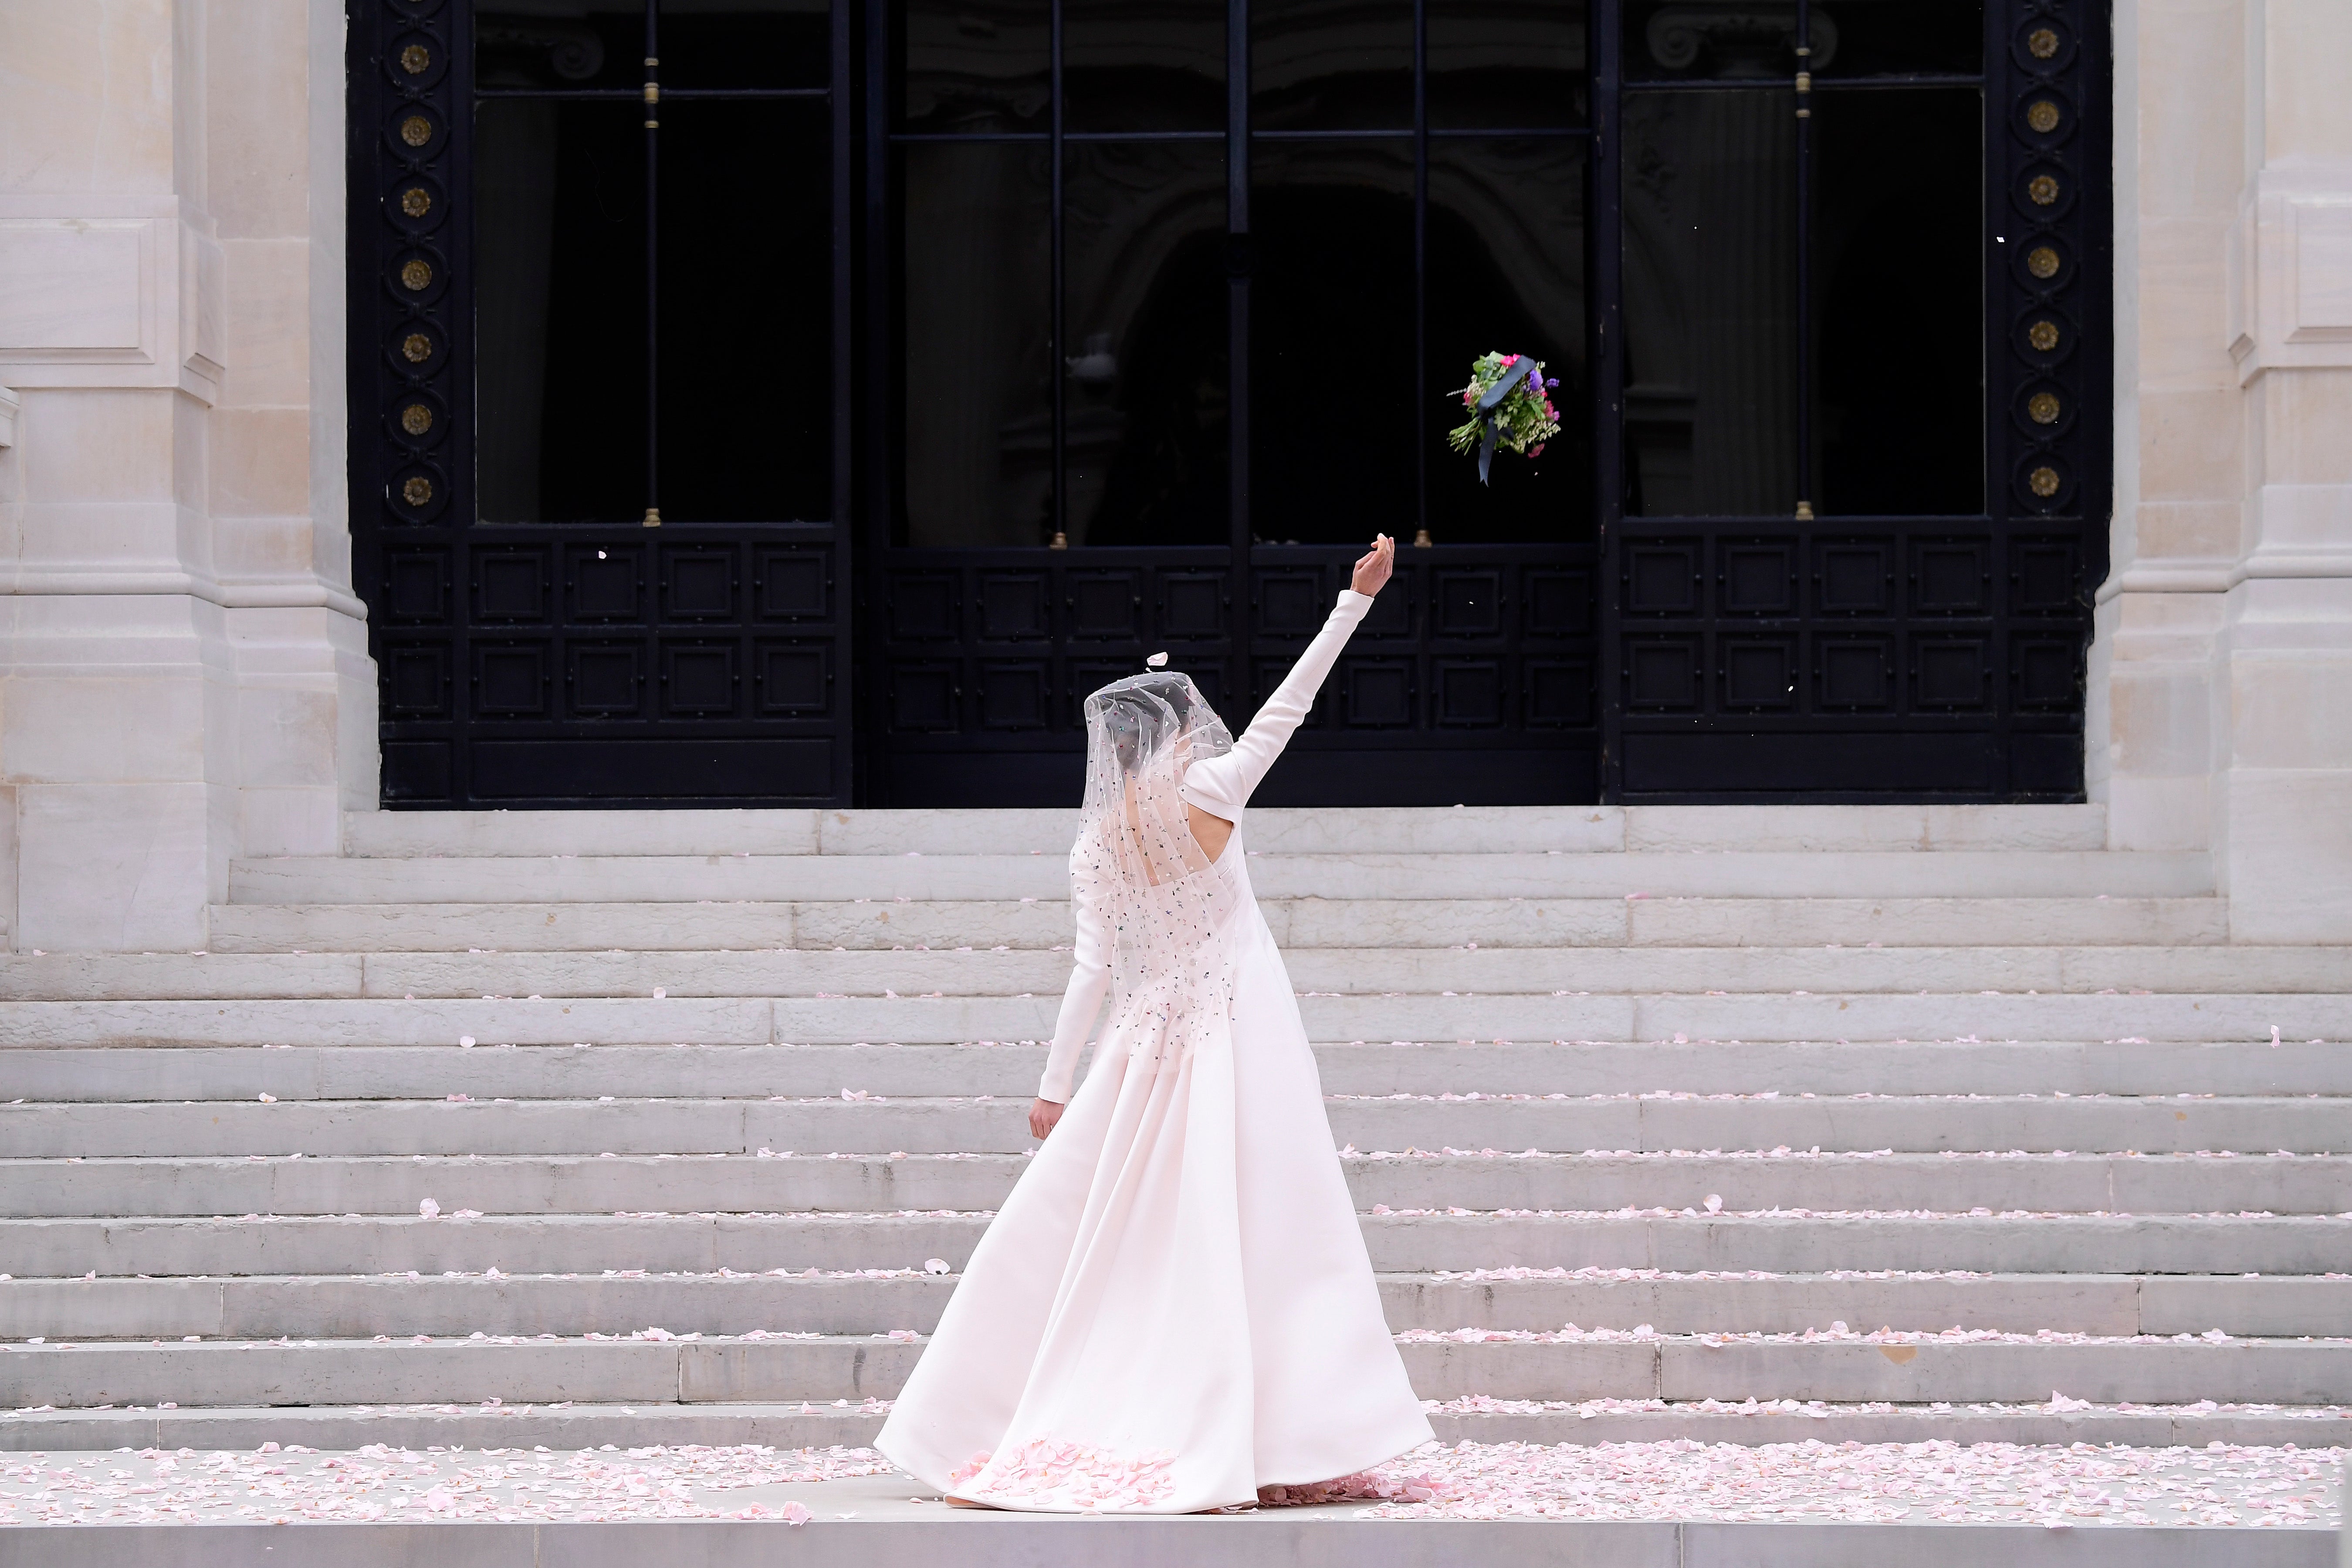 Lucky for some: Qualley, in a Chanel wedding dress, tosses the bouquet during Paris Fashion Week